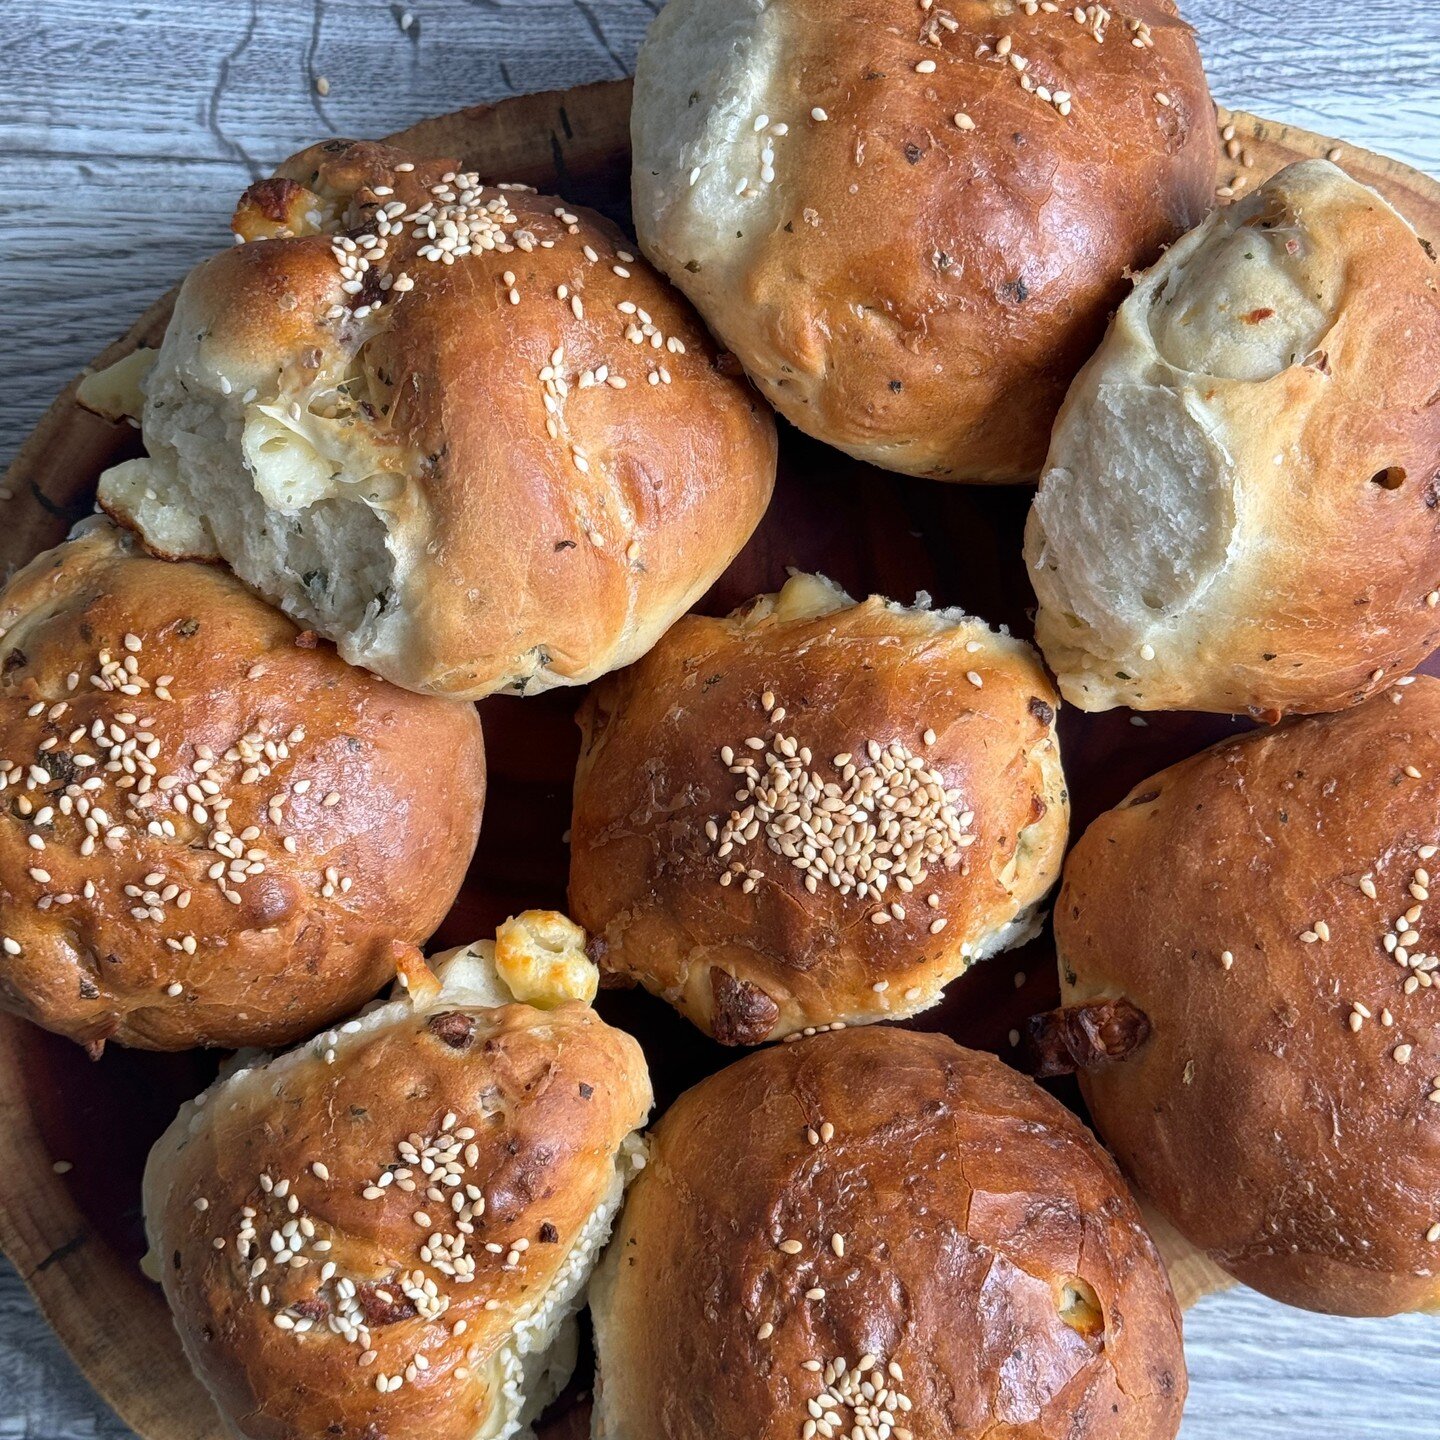 Yiayia Martha&rsquo;s Halloumopite (Halloumi Buns from Cyprus)
Rainydaybites bookclub challenge from Yiayia: Time-perfected Recipes from Greece&rsquo;s Grandmothers 
Another opportunity to explore traditional and classic recipes! Yes!
These buns are 